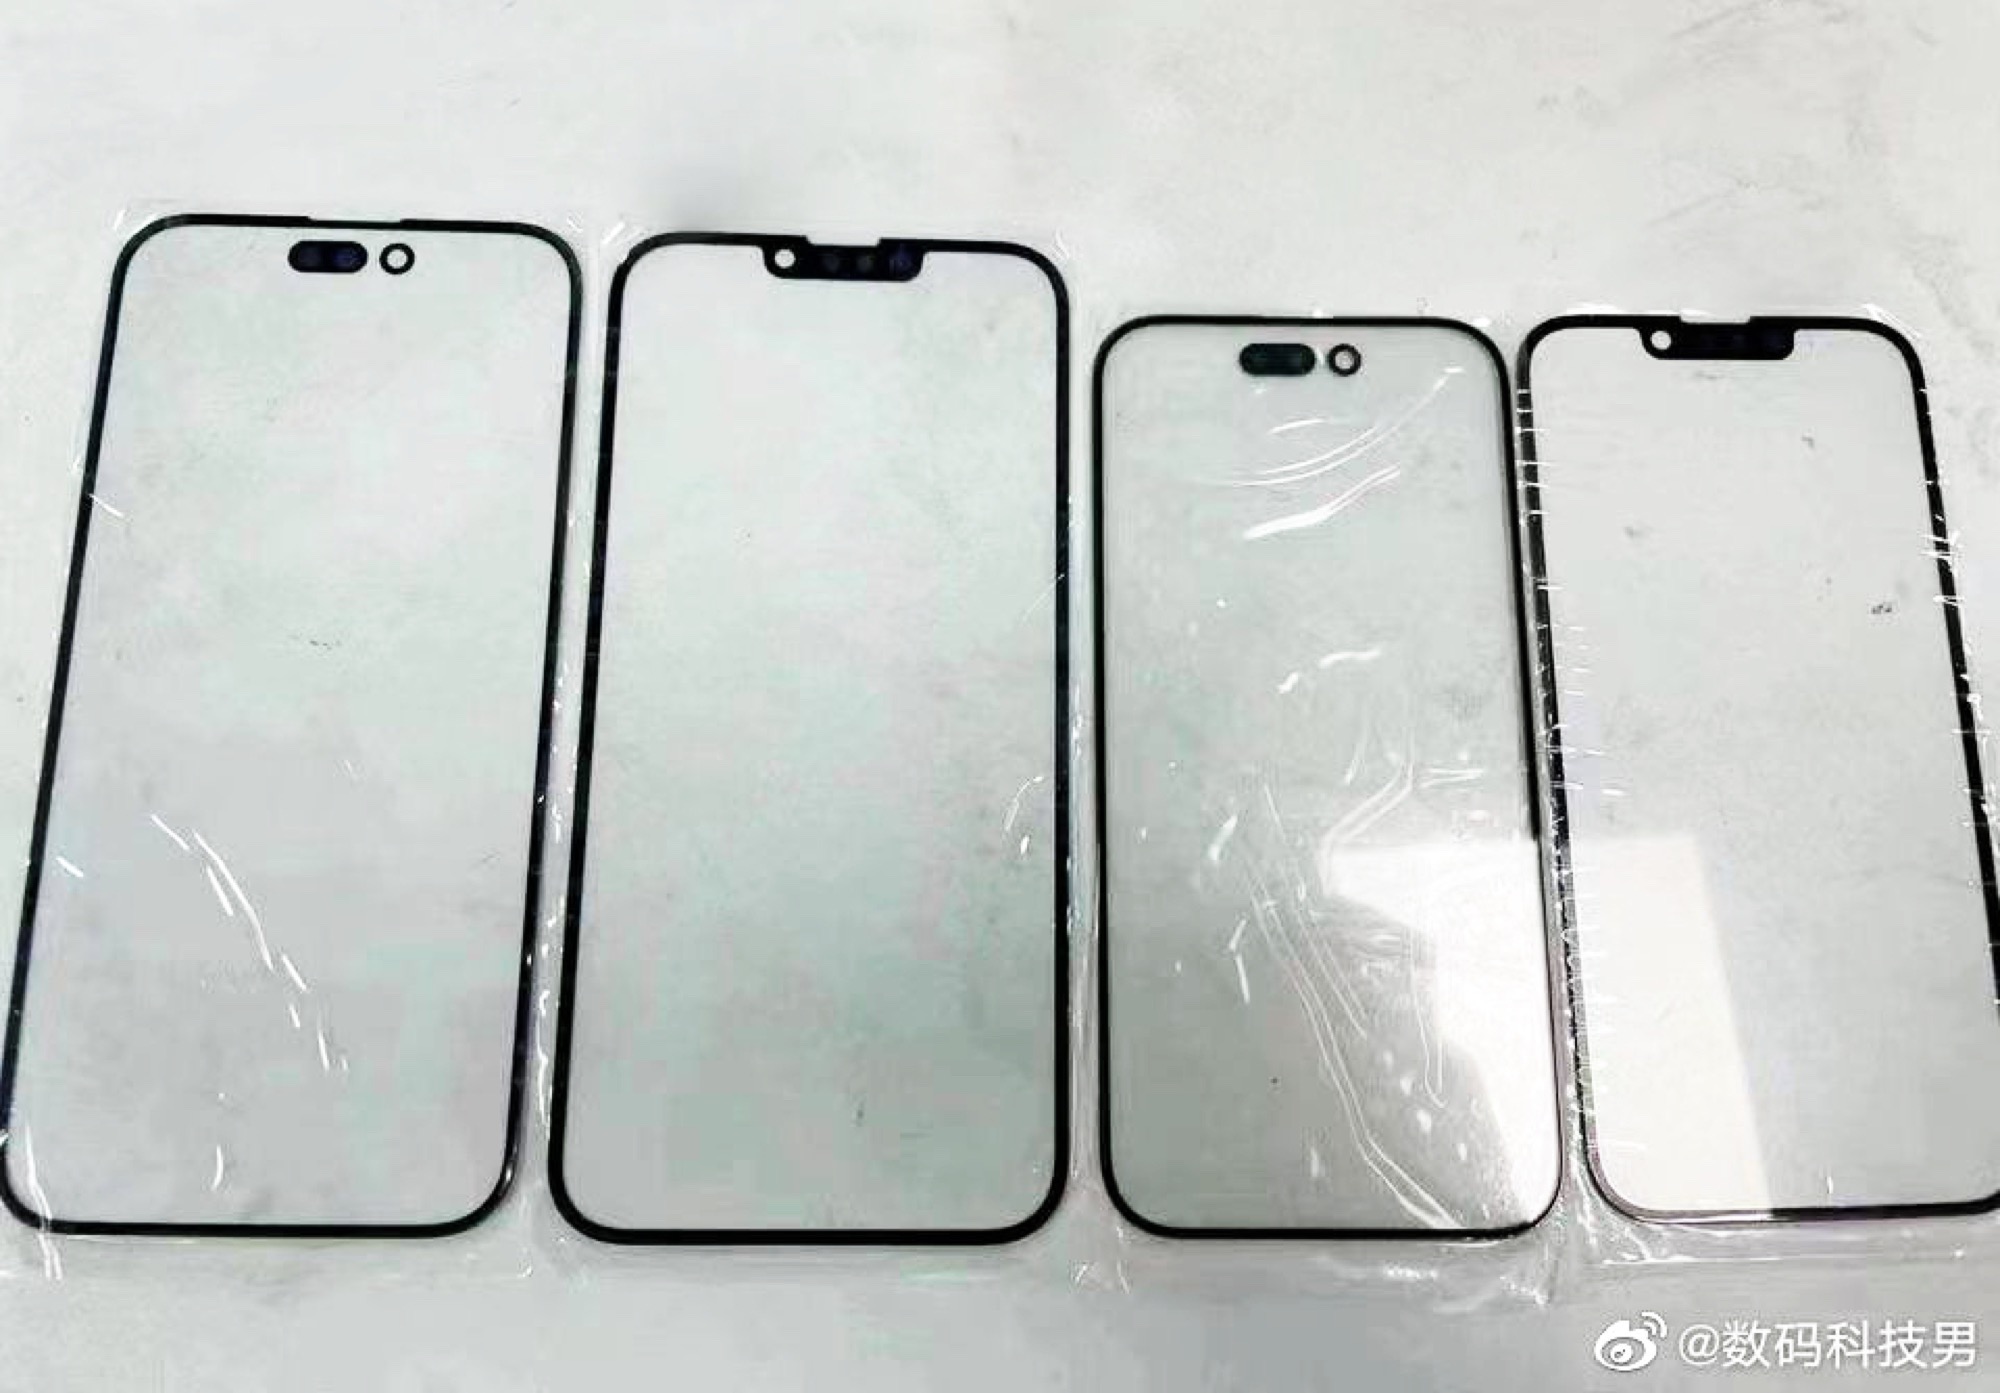 Apple iPhone 14 series front panels leak showing display differences  between the iPhone 14, iPhone 14 Max and the notch-less iPhone 14 Pro and  iPhone 14 Pro Max -  News